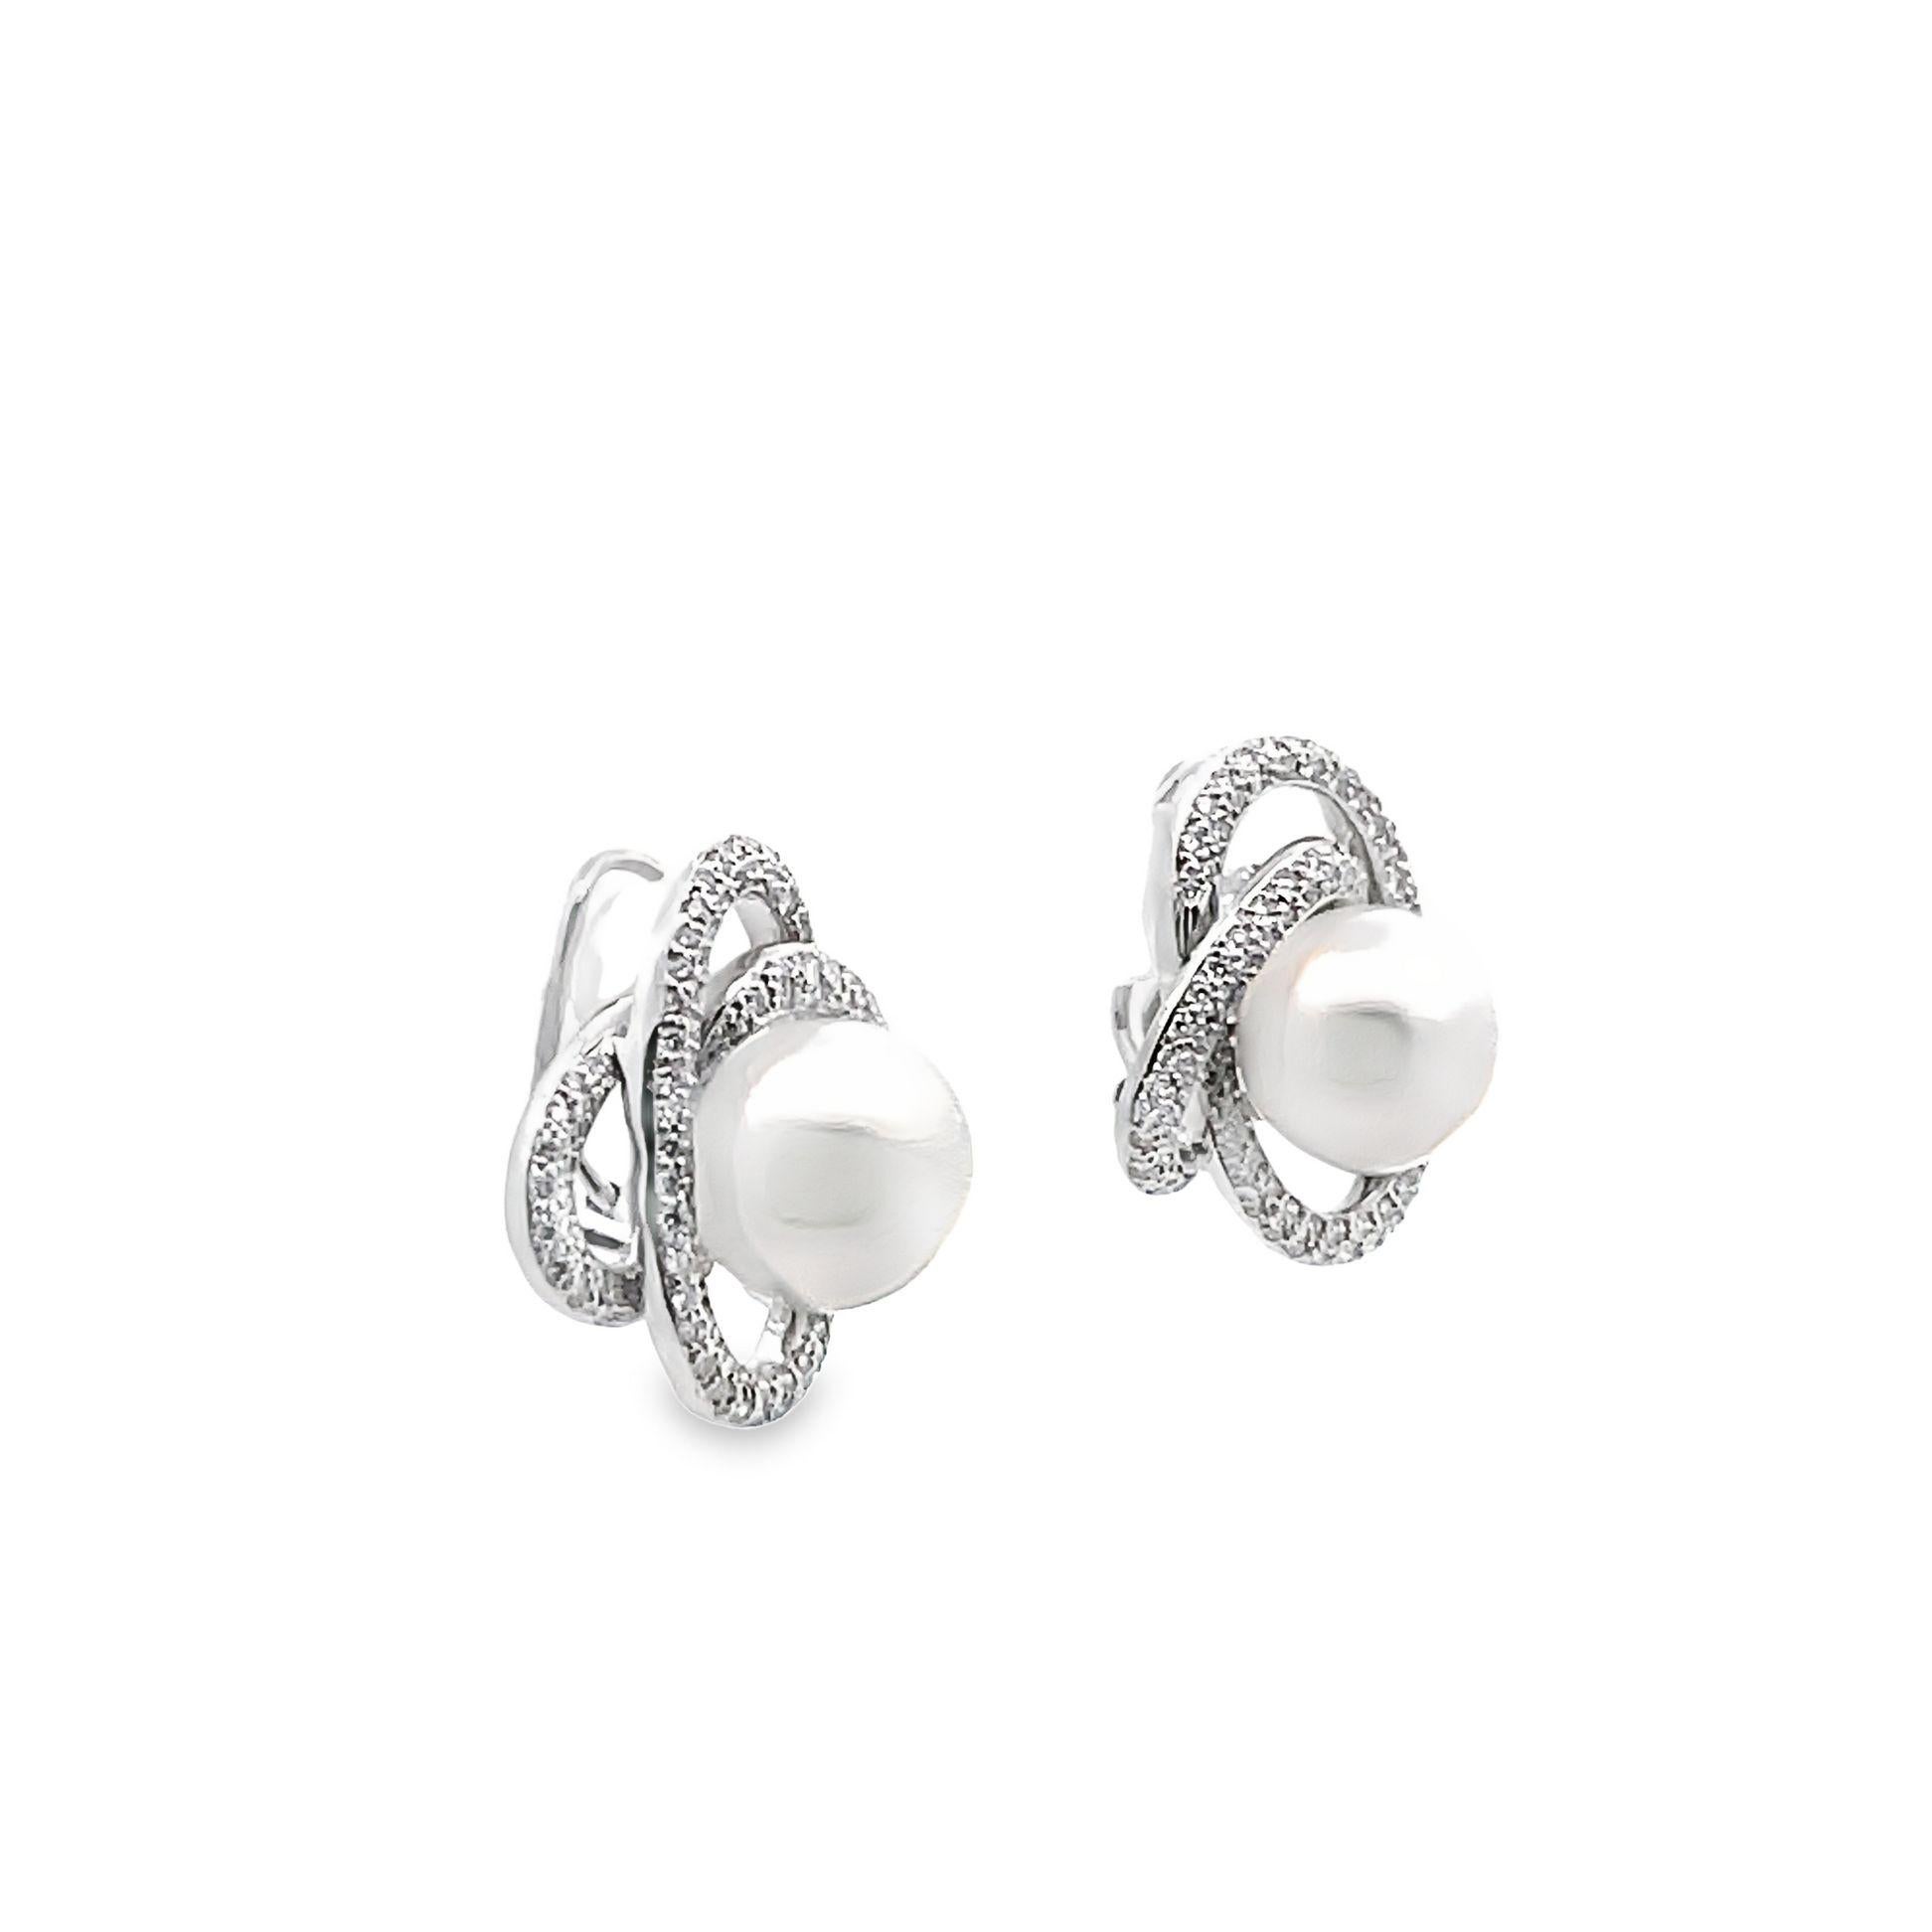 A stylish and classy pair of South Sea pearl earrings. Each pearl measures 12.5 millimeters and are perfectly matching in shape and quality. Perfectly round, free of blemishes and an excellent luster as light rolls across the pearls. They are